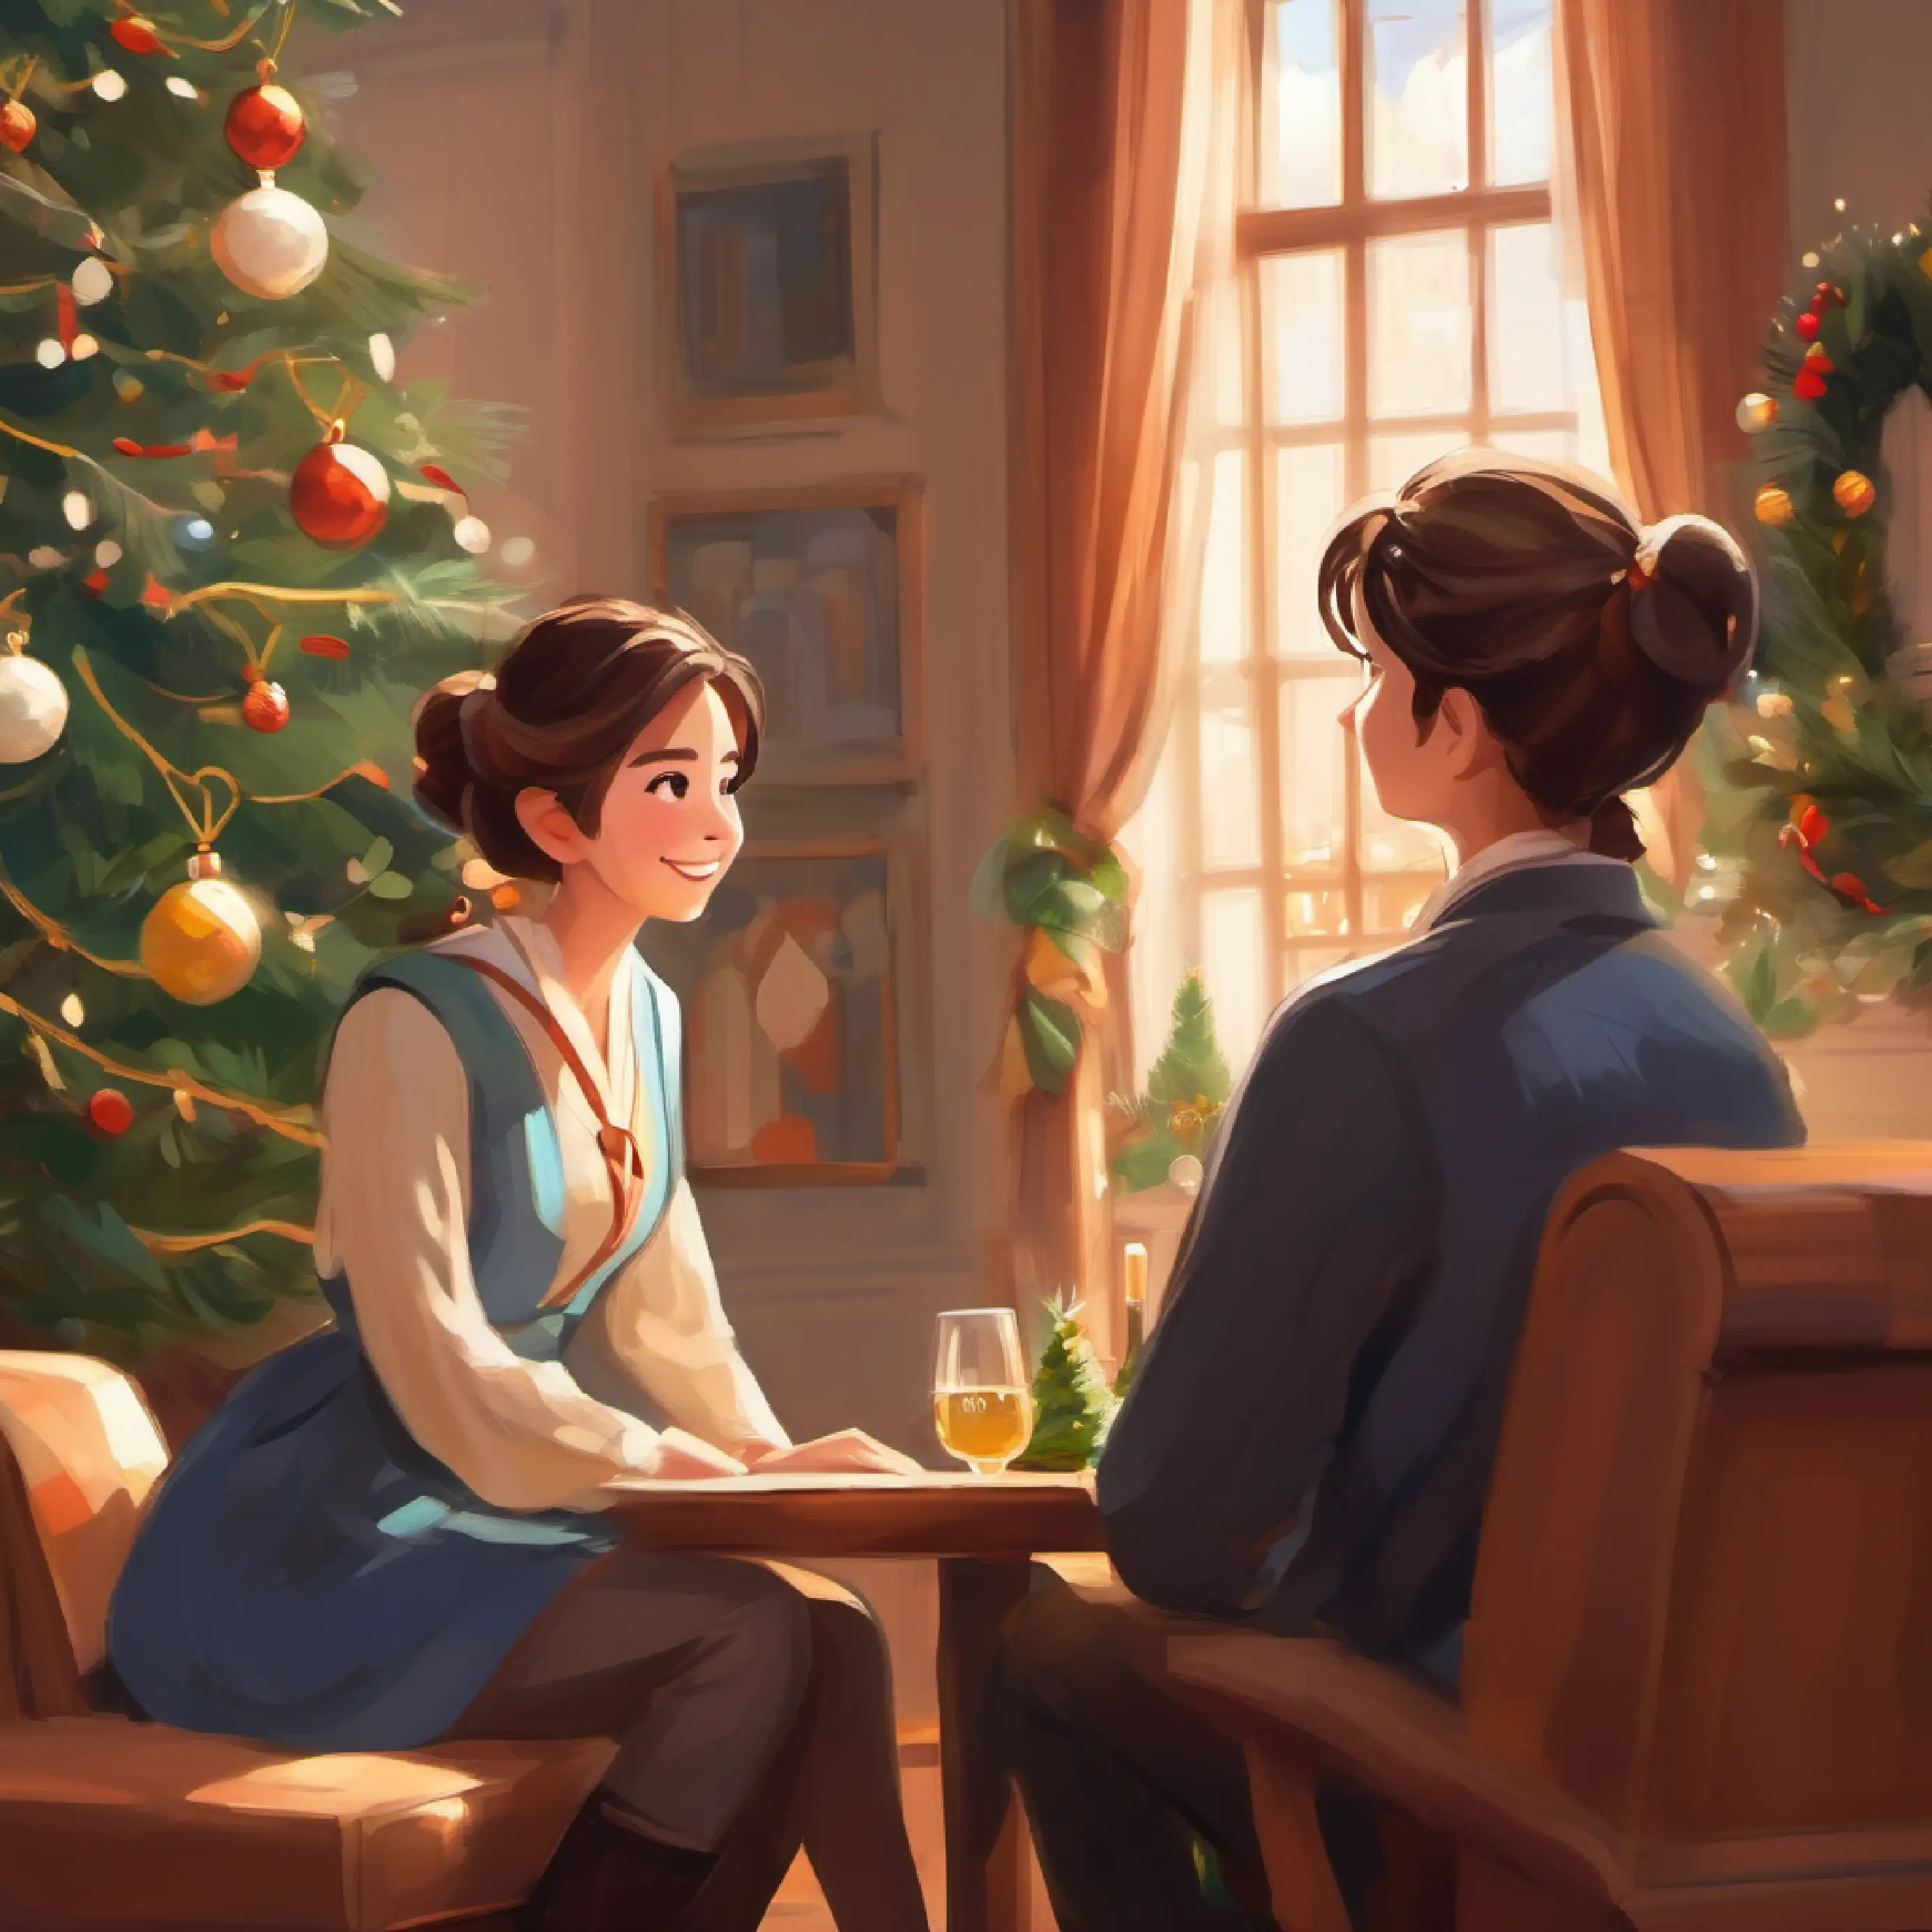 Reflective conversation with Warm smile, tender gaze, brown hair tied back, emotional growth.